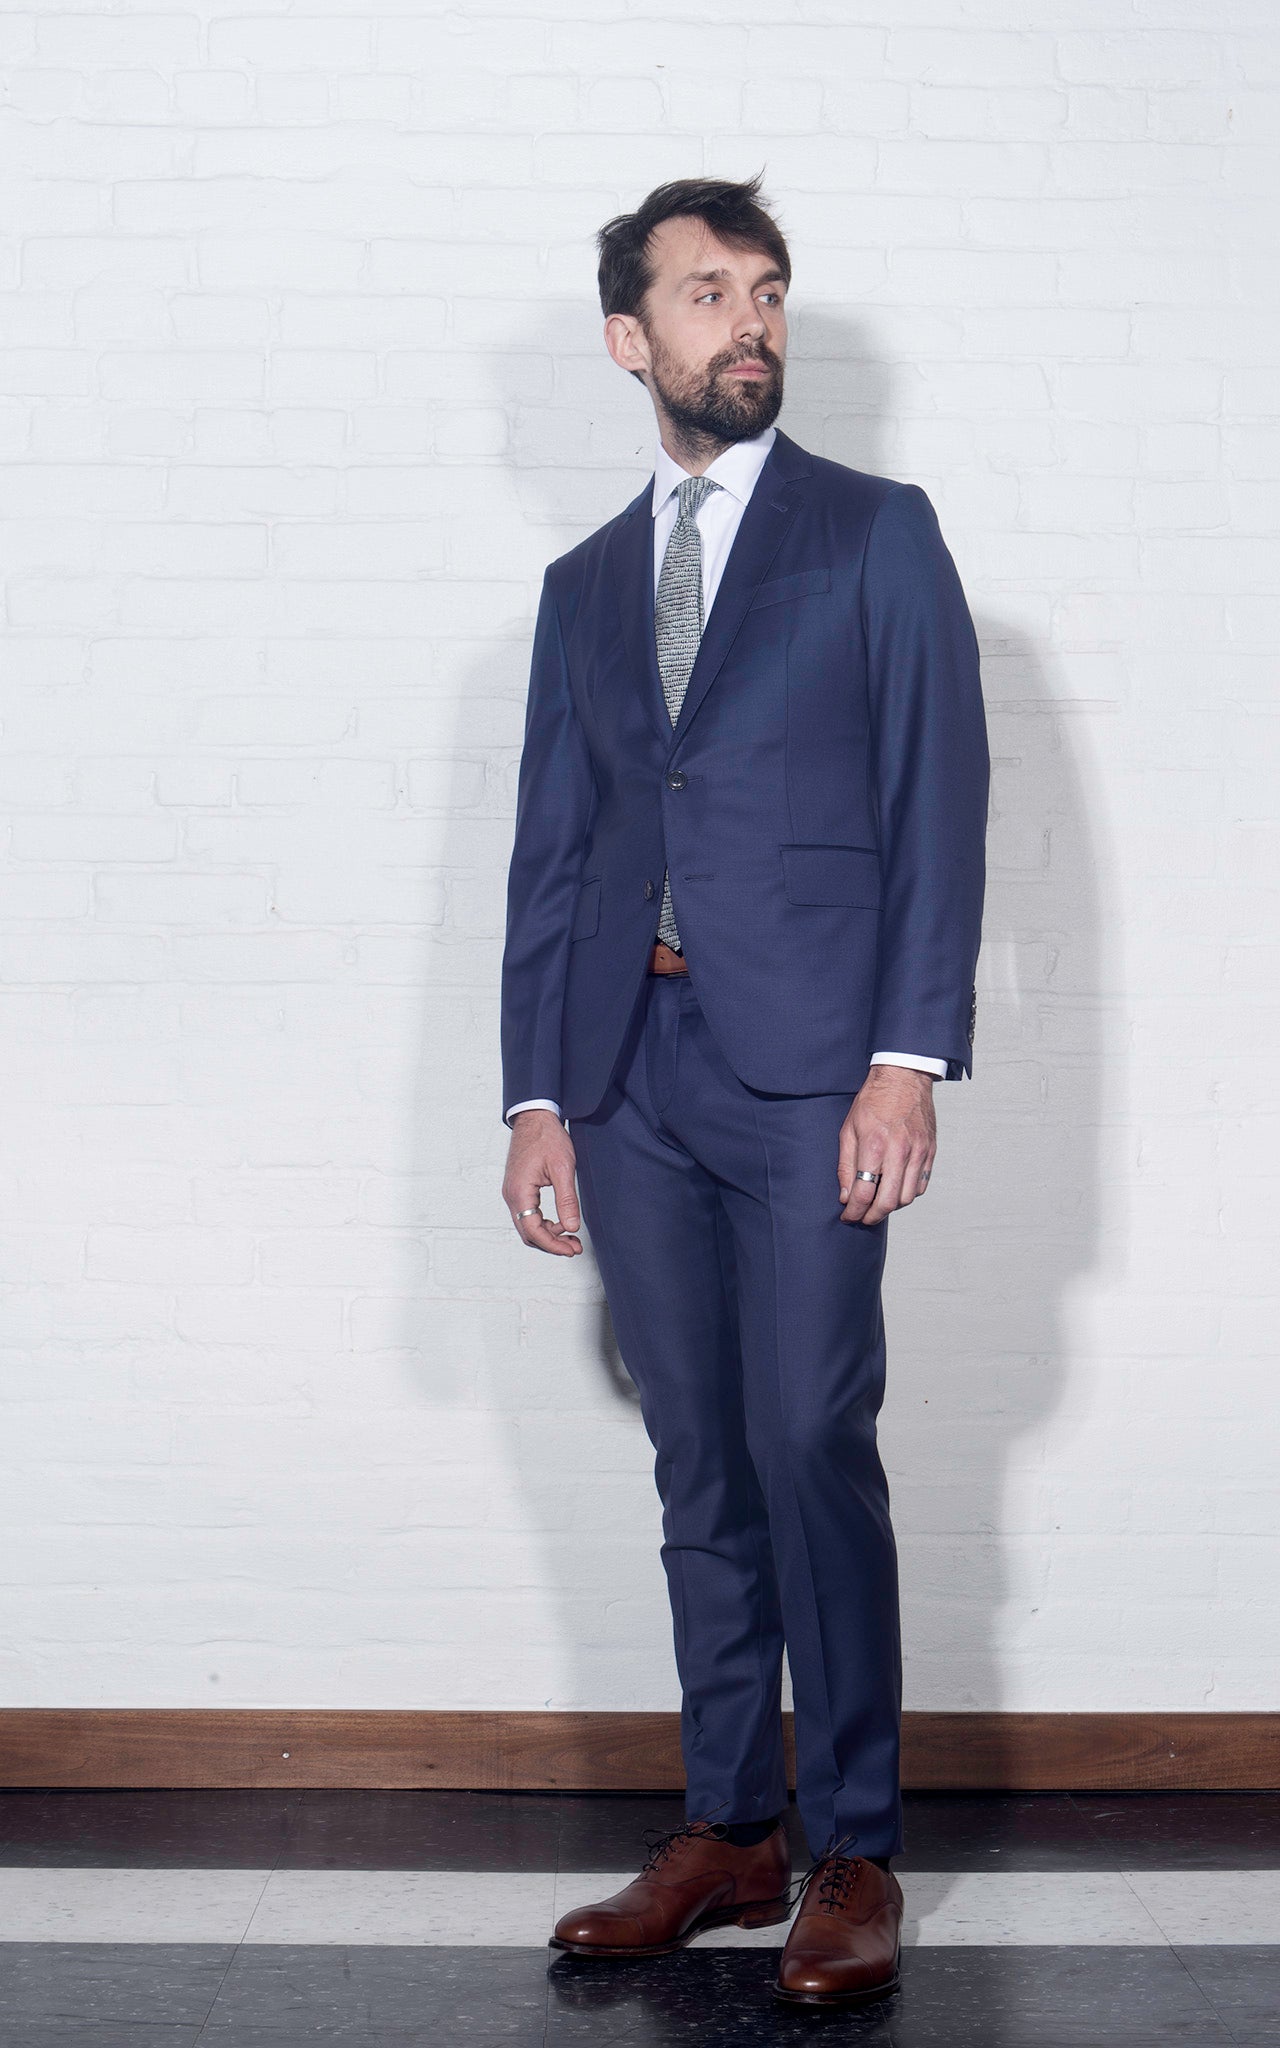 On-body shot of Brooklyn Tailors 2020 Version BKT50 Tailored Jacket in Super 120s Twill - Bright Navy. Model is wearing jacket with matching pants, white dress shirt, and tie. Photo taken from side